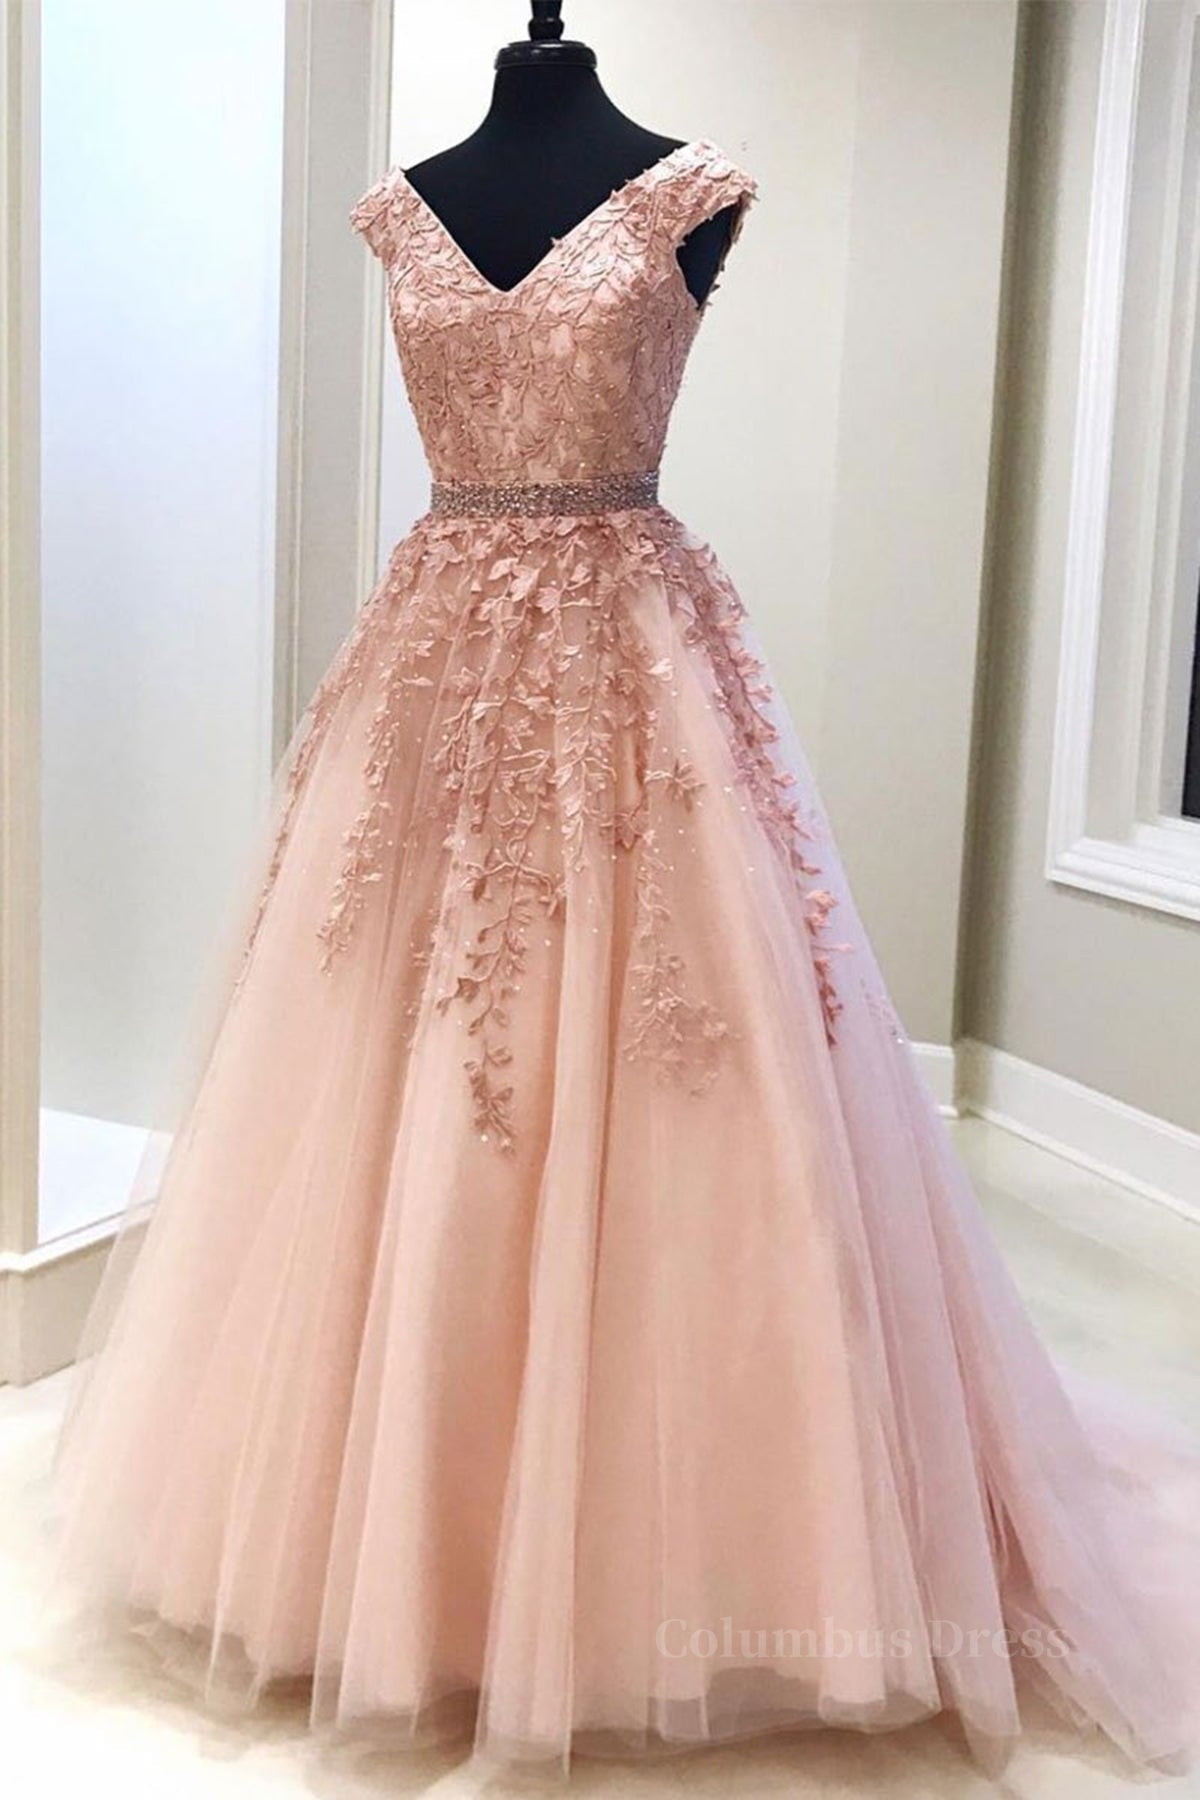 Prom Dress Red, Pink V Neck Long Lace Prom Dresses, Pink V Neck Long Lace Formal Evening Dresses